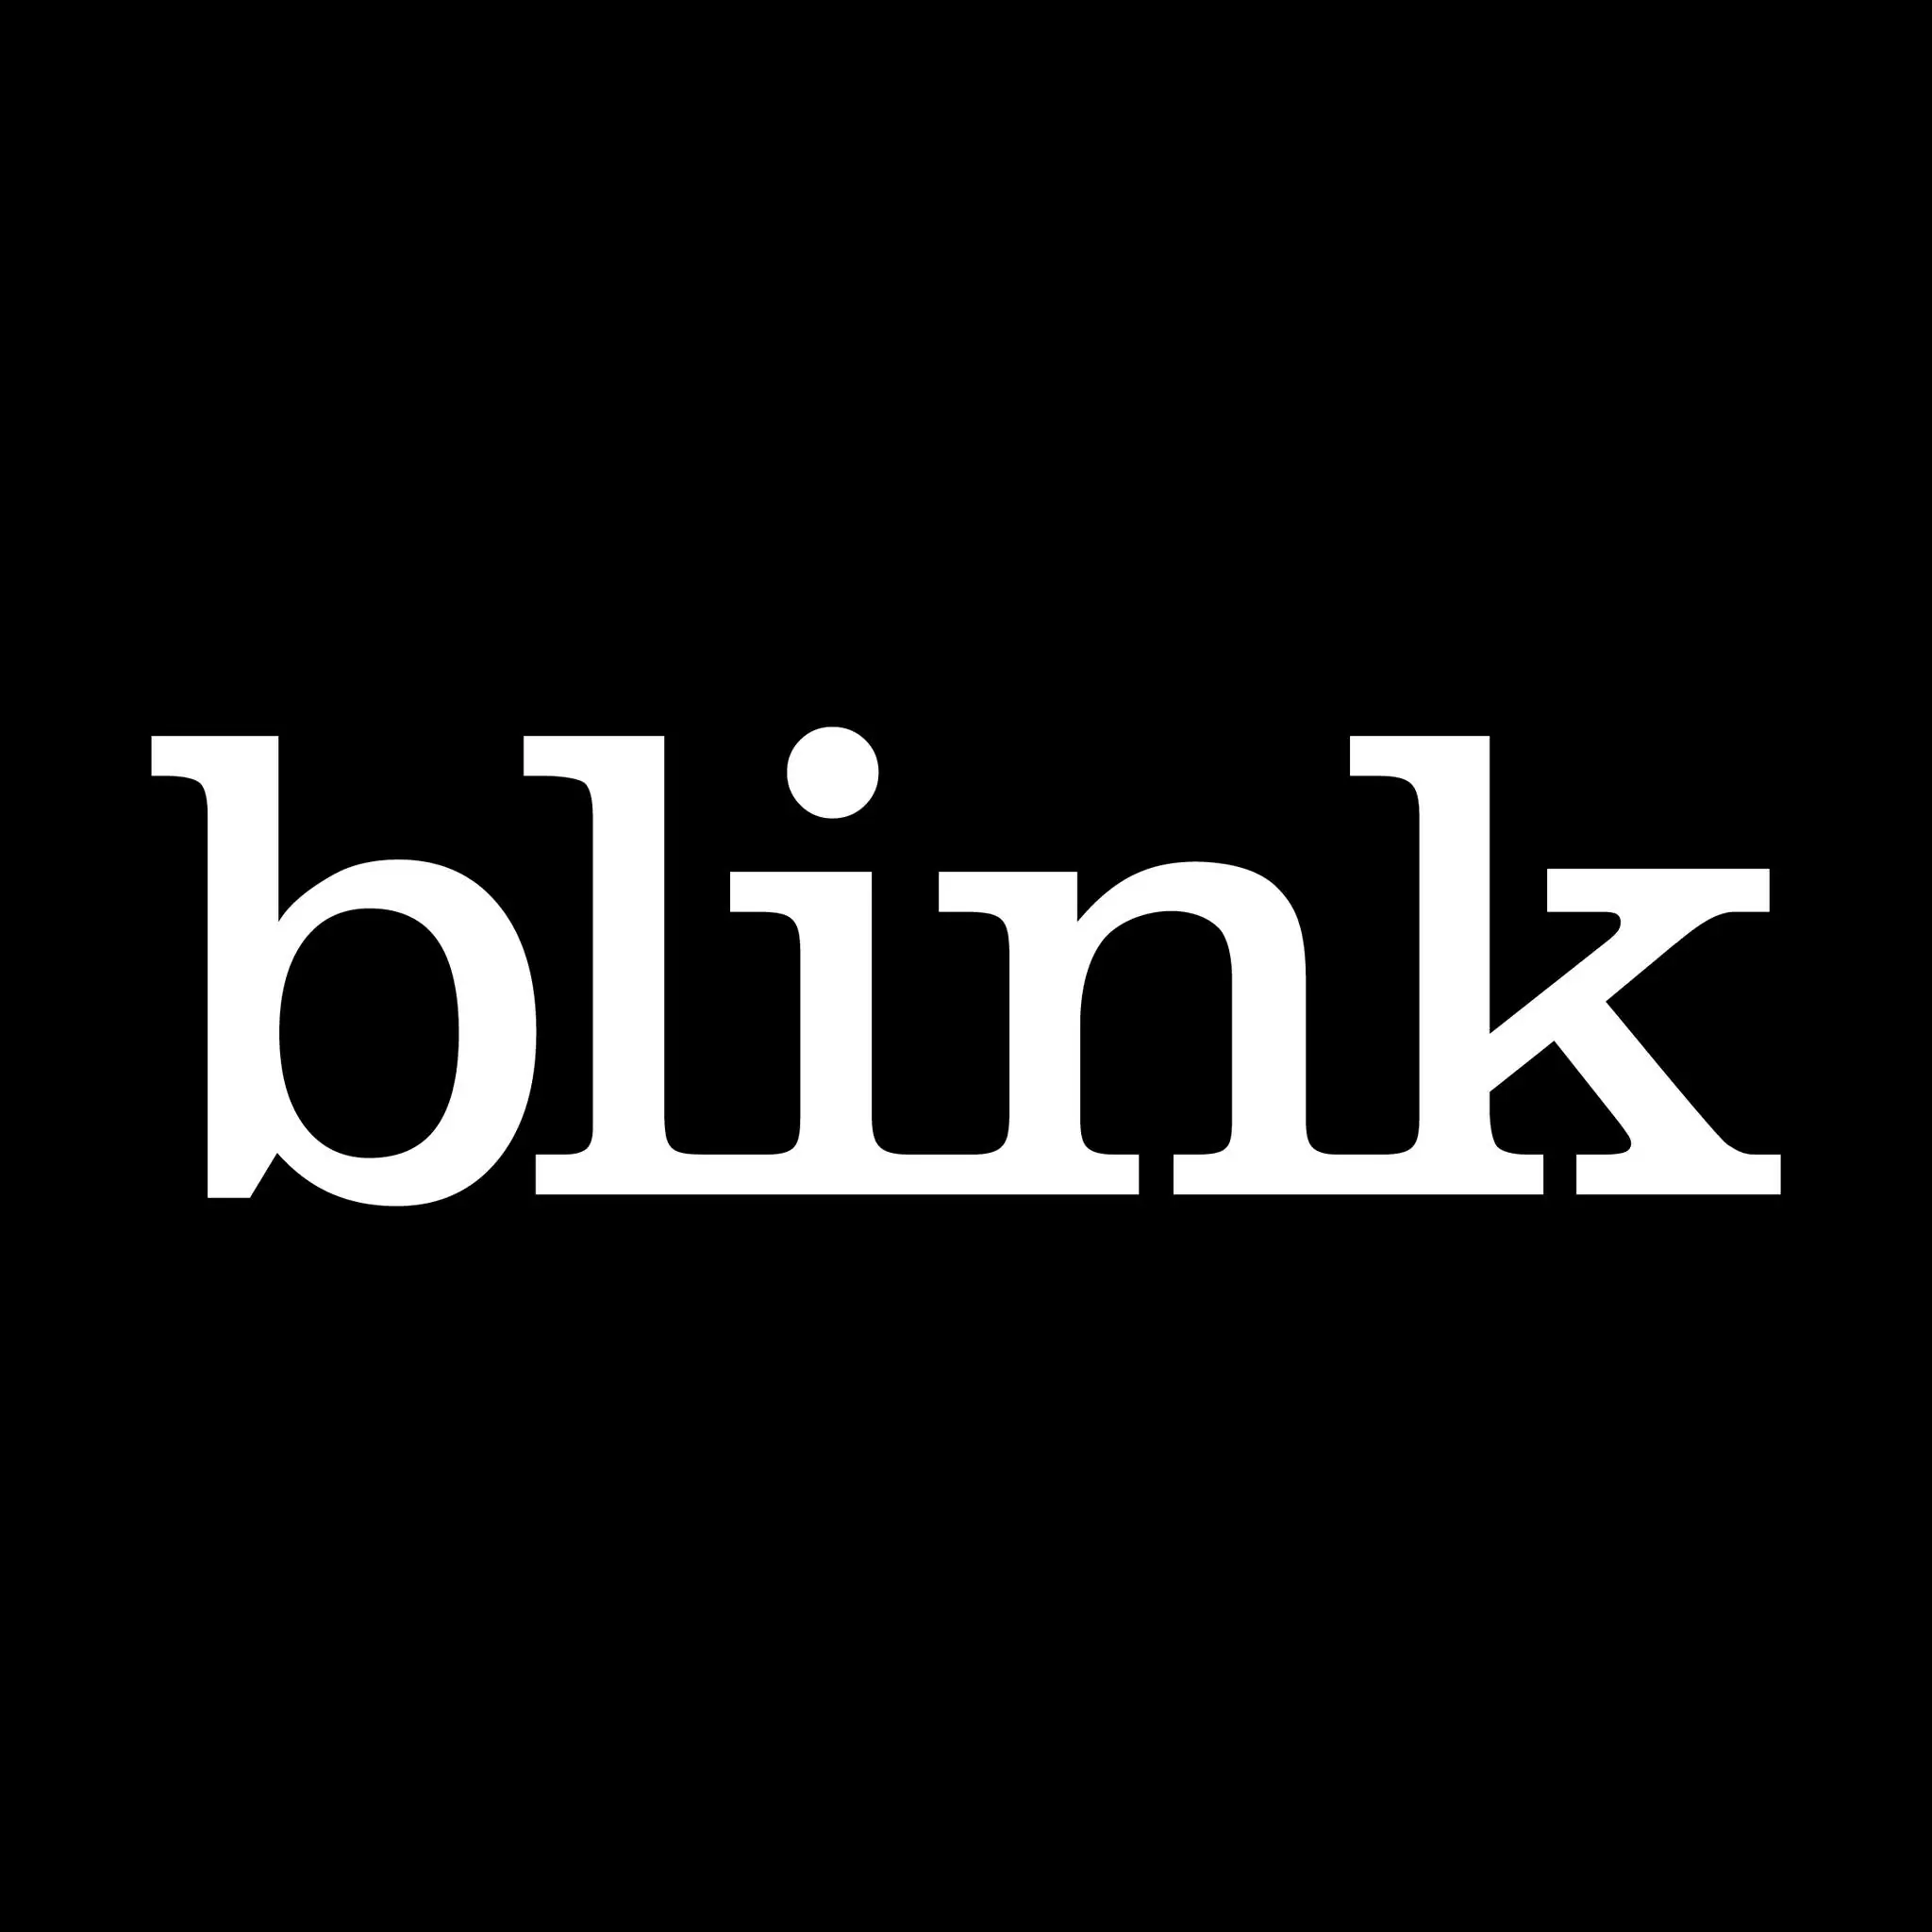 Blink, founded in 2000, is a user experience strategy, research, design, and web development agency.